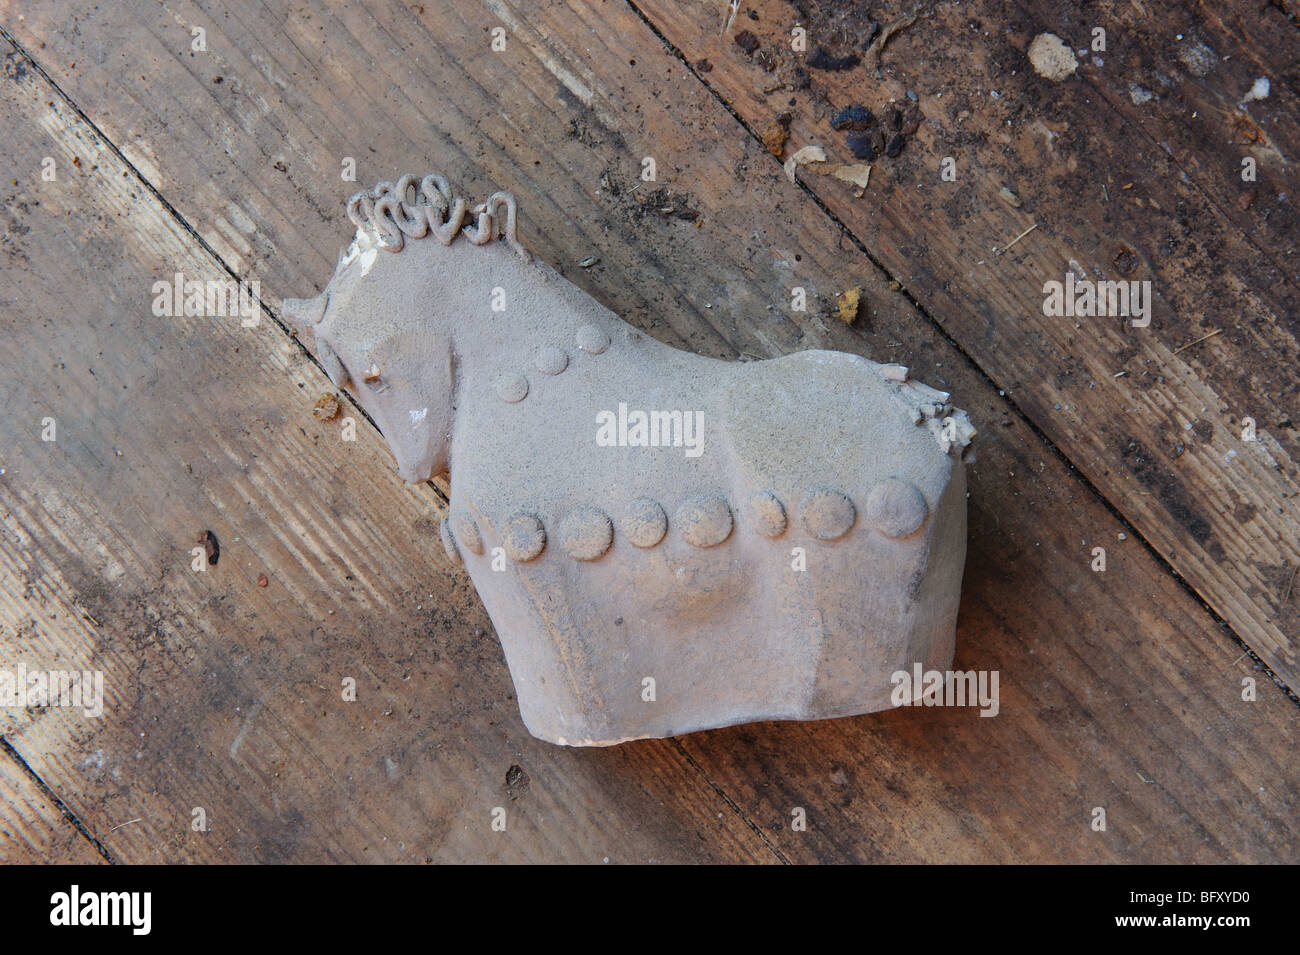 Unfinished, unglazed and broken ceramic horse ornament lies on dirty wooden floor Stock Photo